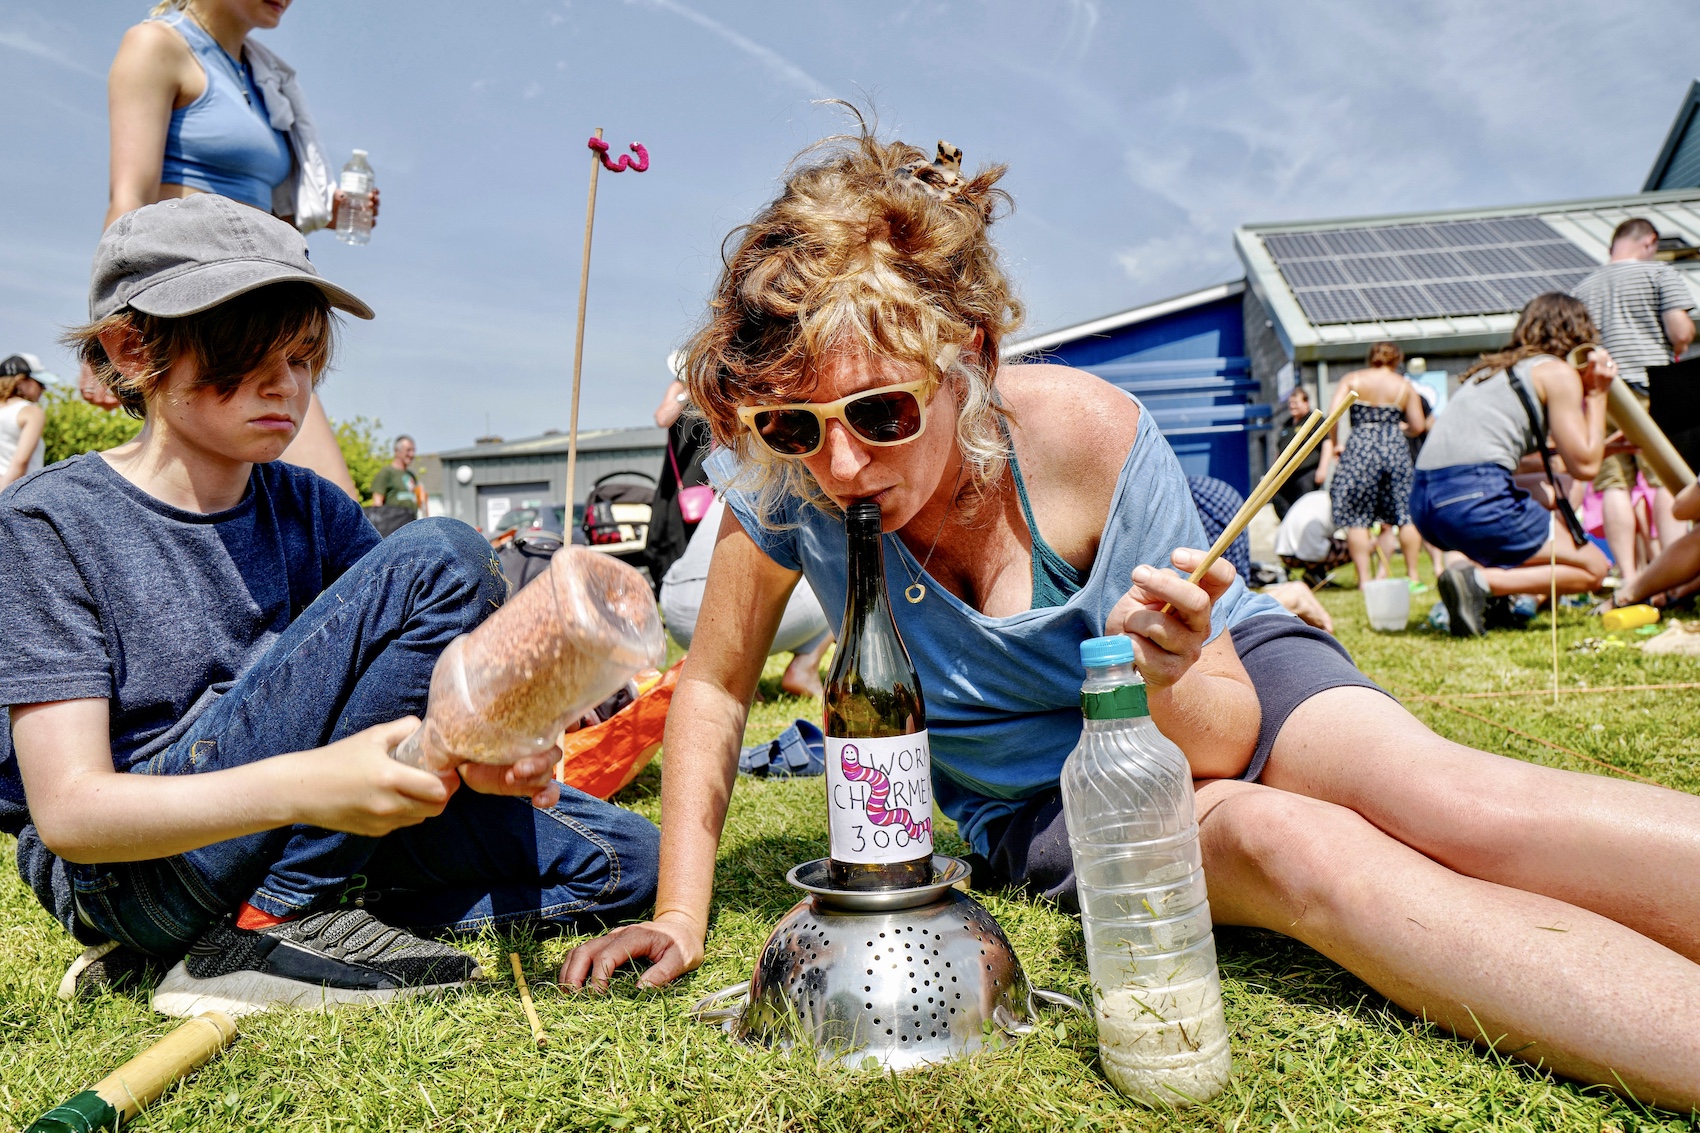 A woman competitor blowing a bottle to make sound through it into the soil and her kid beside making more sound from shaking a bottle full of small balls